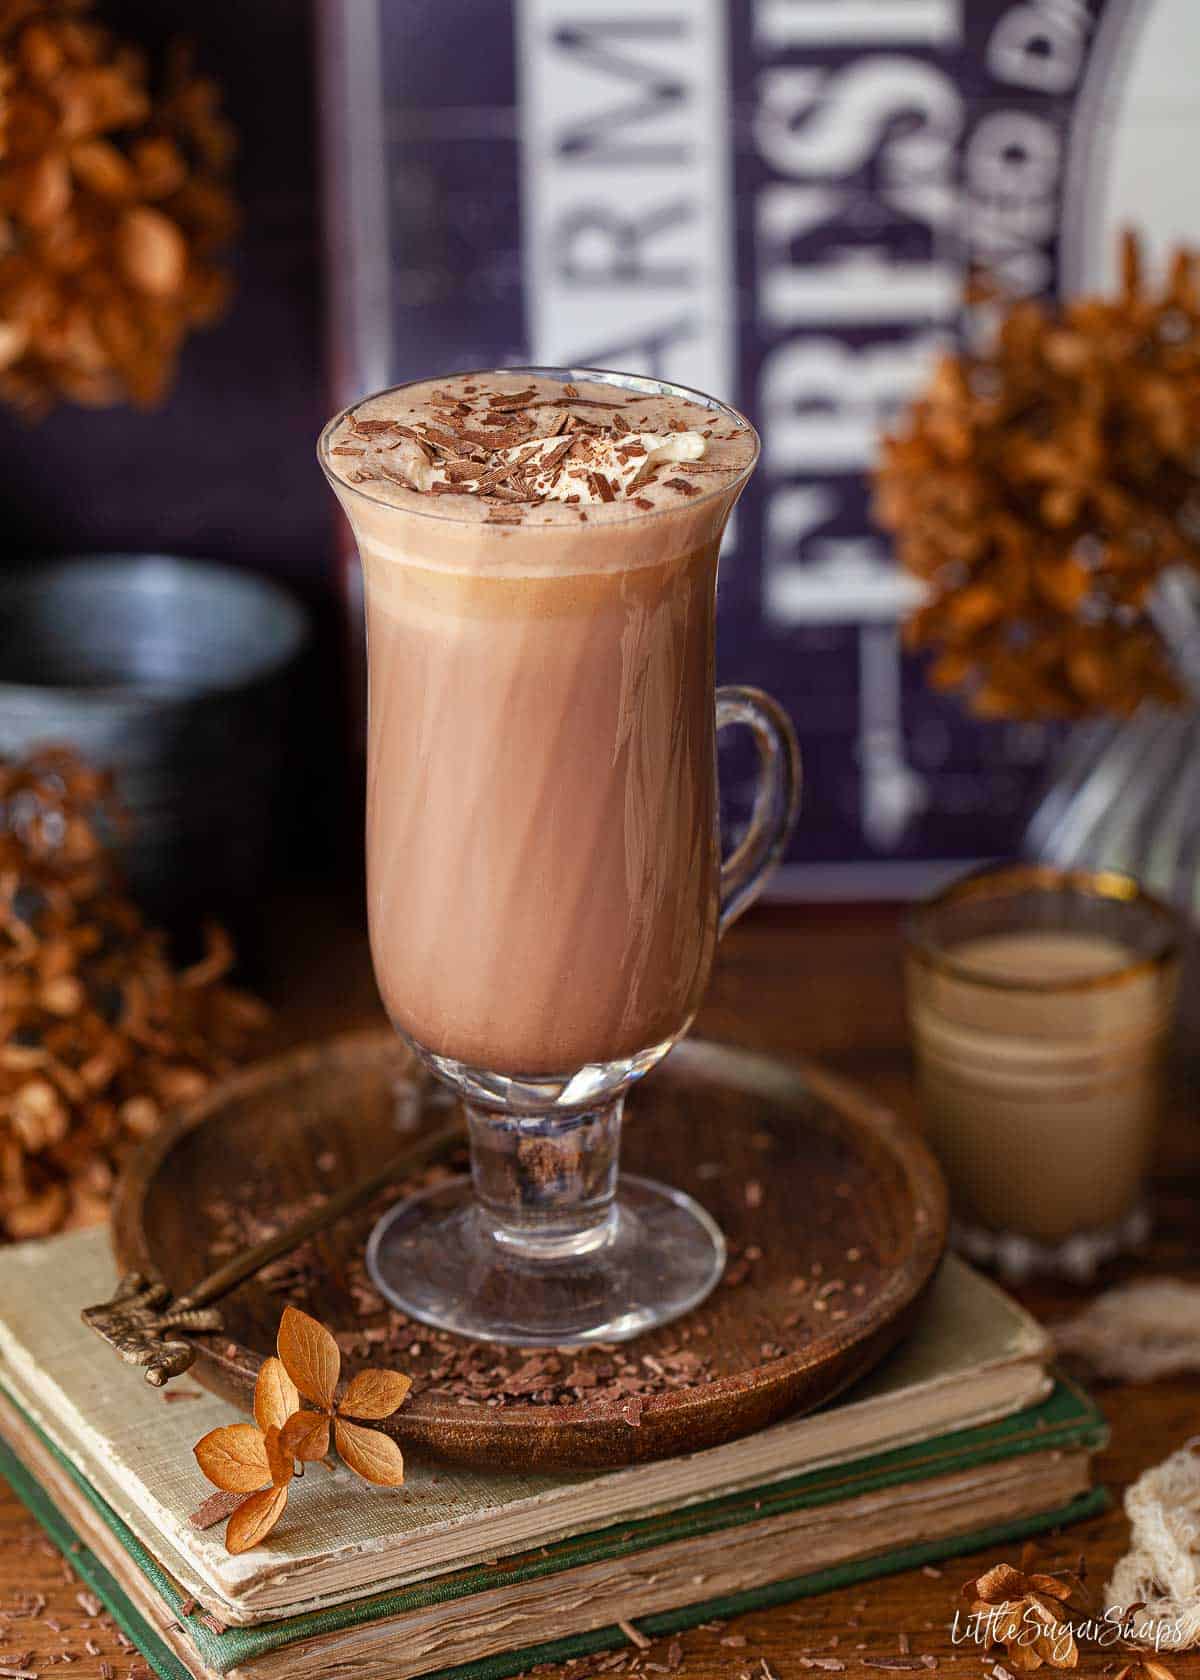 A Vintage glass holding Baileys Hot Chocolate with Baileys whipped cream.